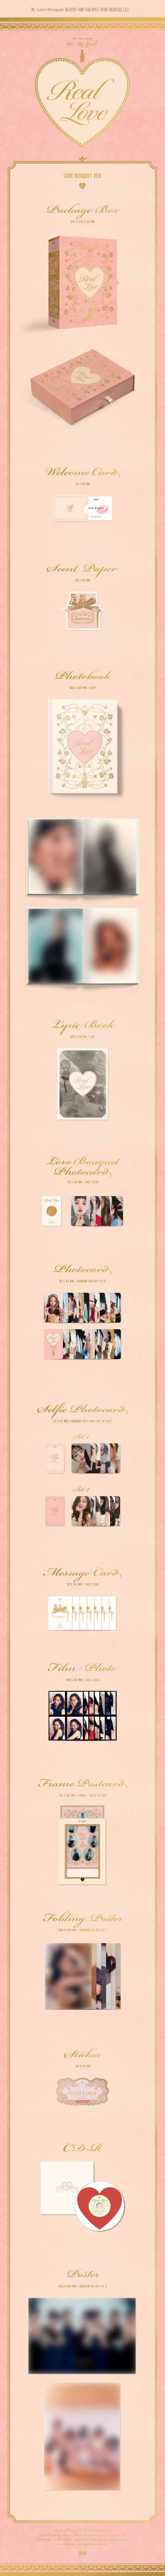 OH MY GIRL - 2ND ALBUM [Real Love] (Love Bouquet ver. / LIMITED) ohmygirl ohmygirl2ndalbum ohmygirlalbum OHMYGIRlcd OHMYGIRllimited LoveBouquet